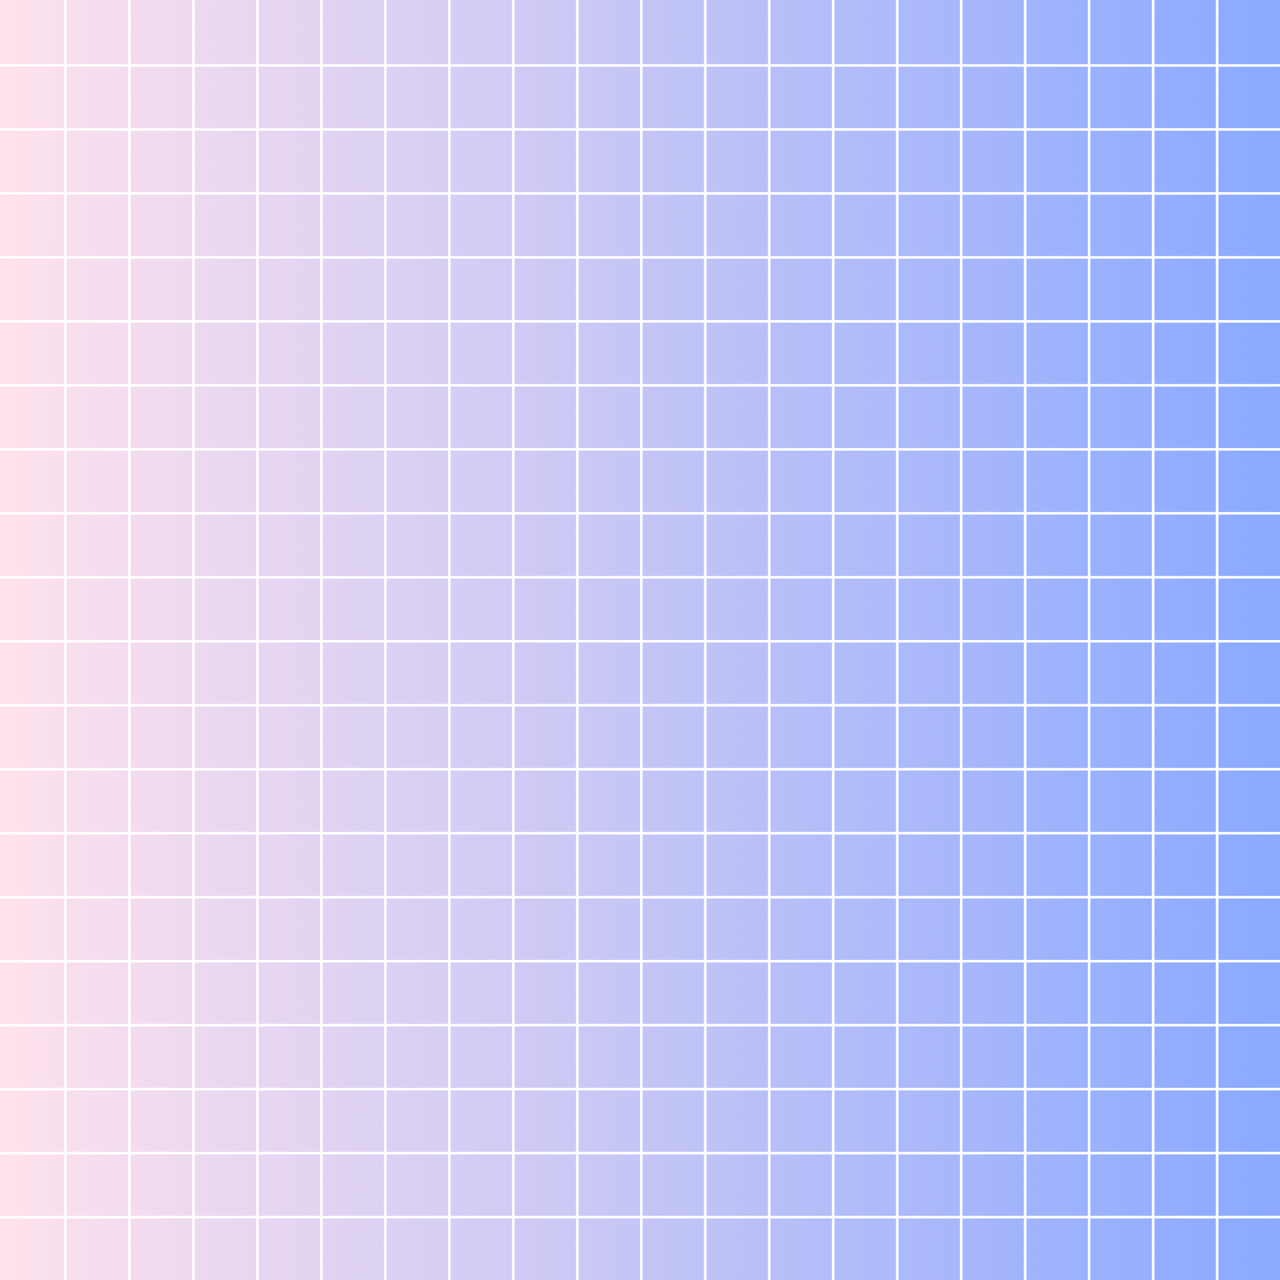 A gradient of blue and purple with a grid pattern - Grid